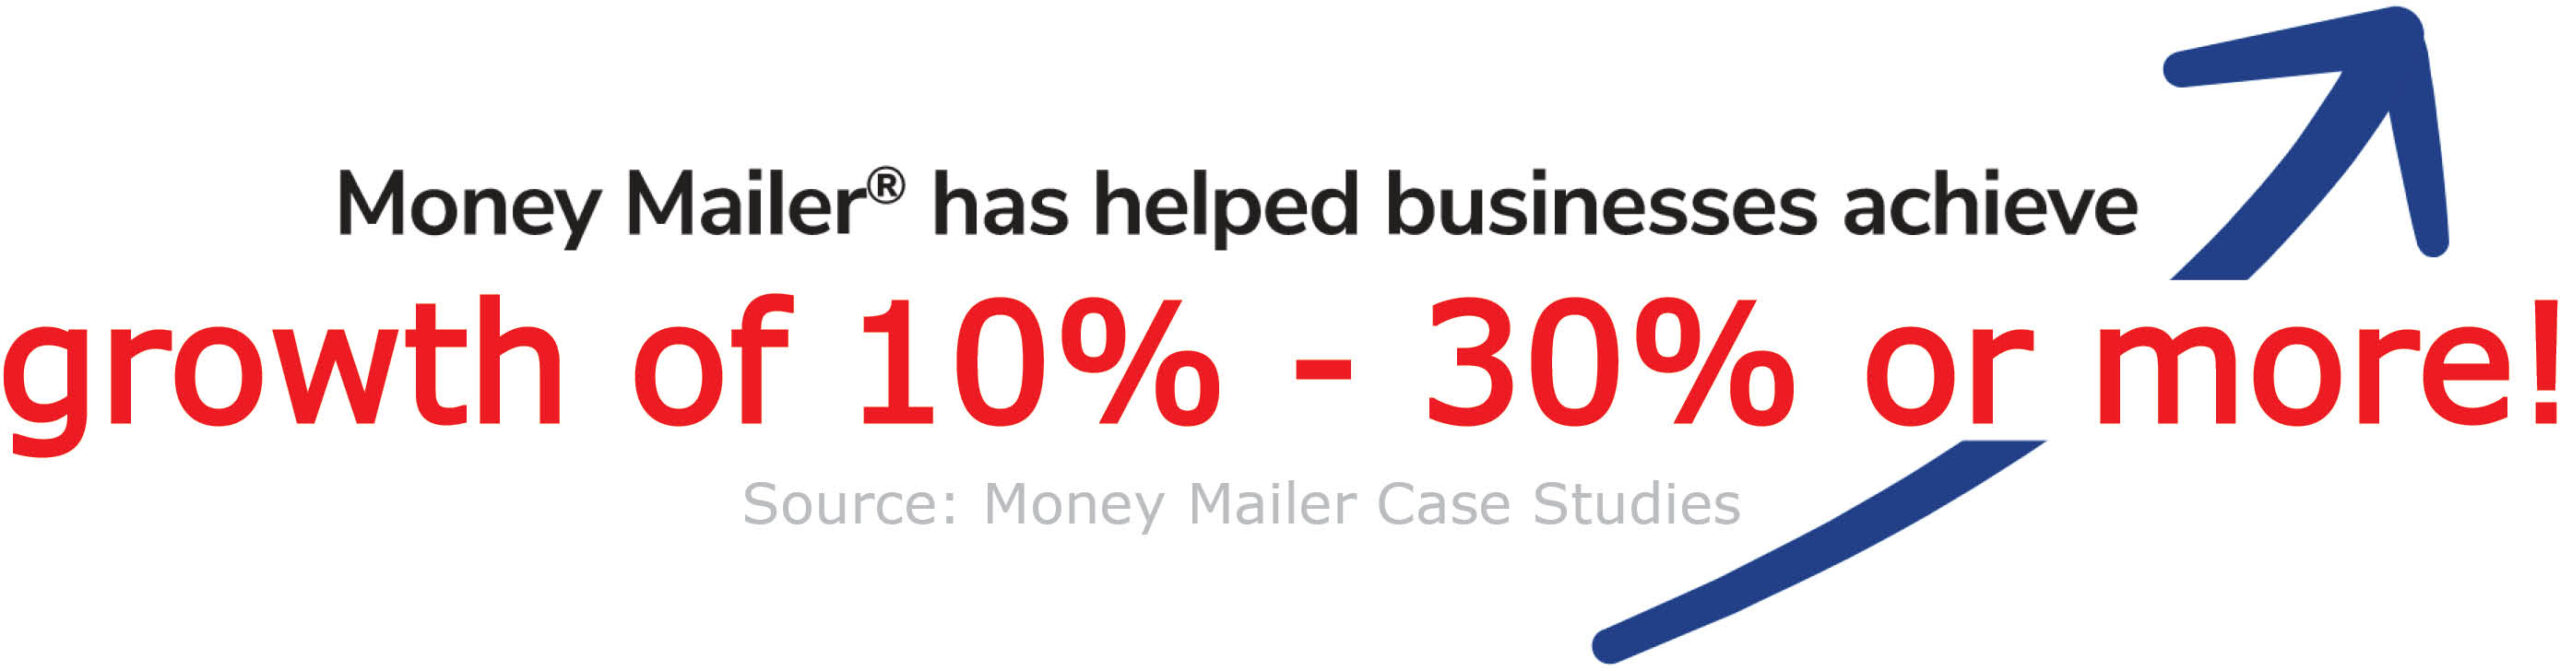 Money Mailer helps businesses achieve growth